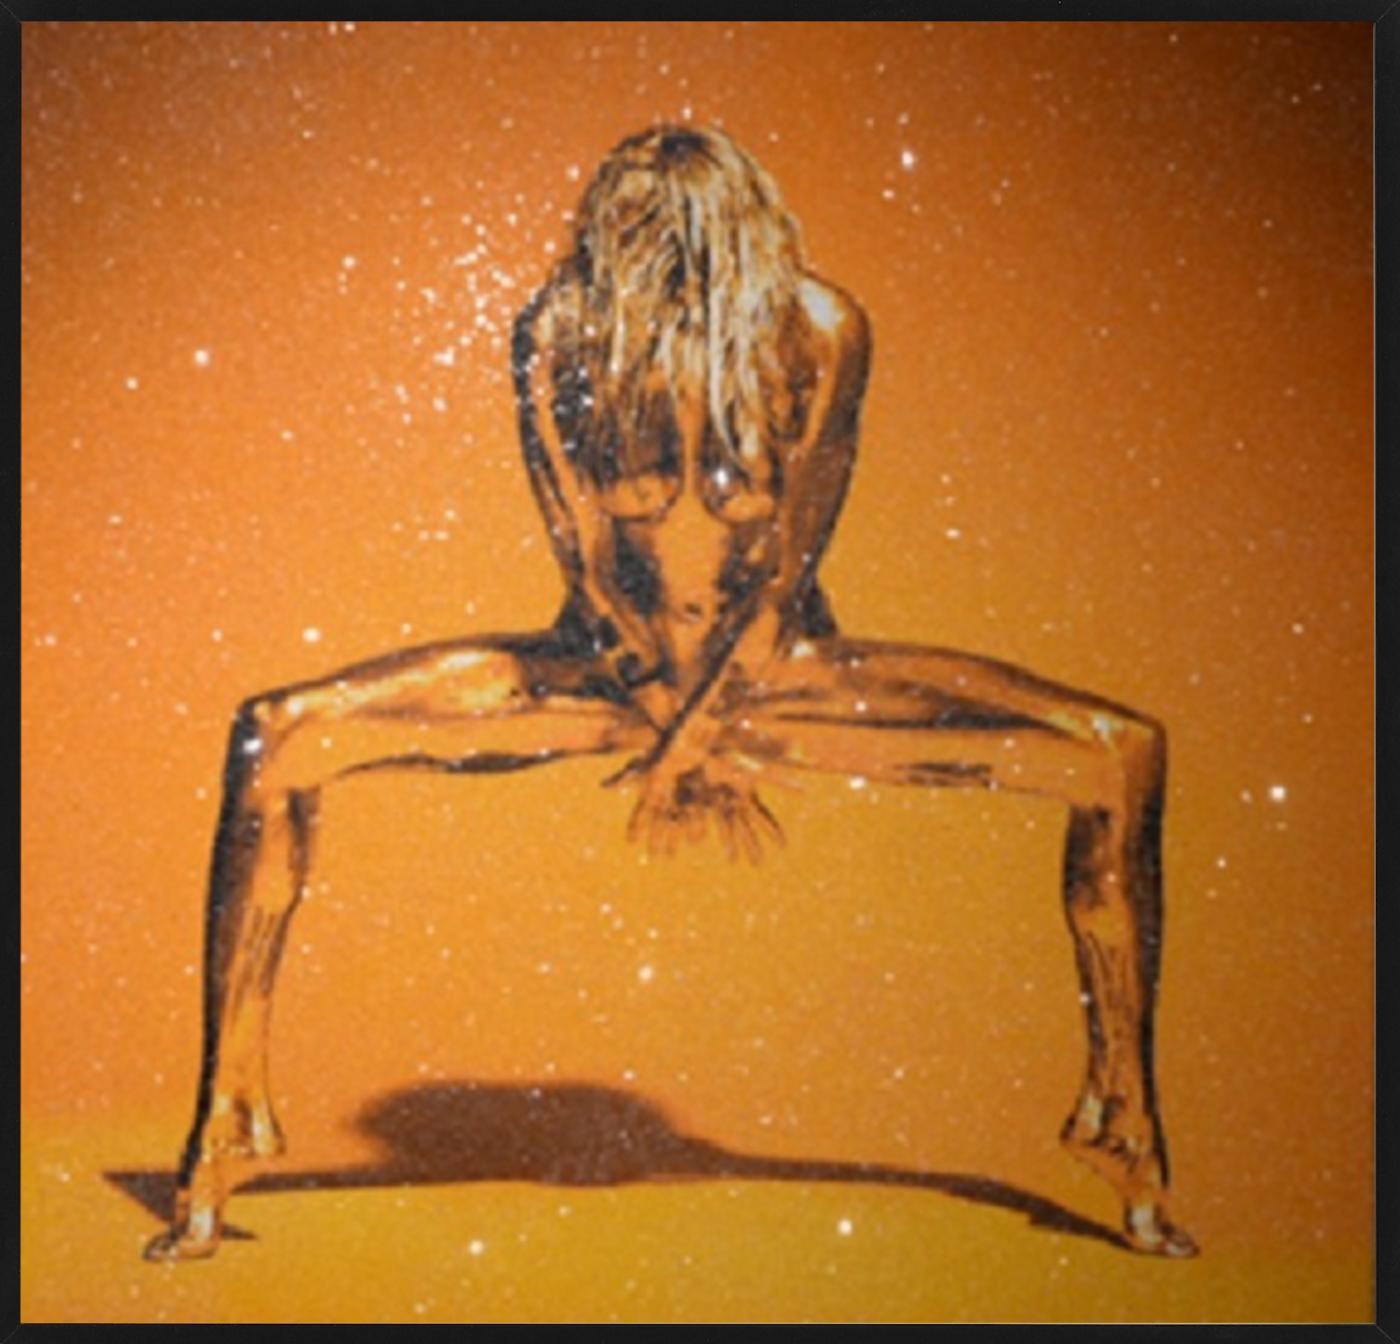 Goldeneye Diamond Dust - Nude Model painted in gold posing with diamonds For Sale 2